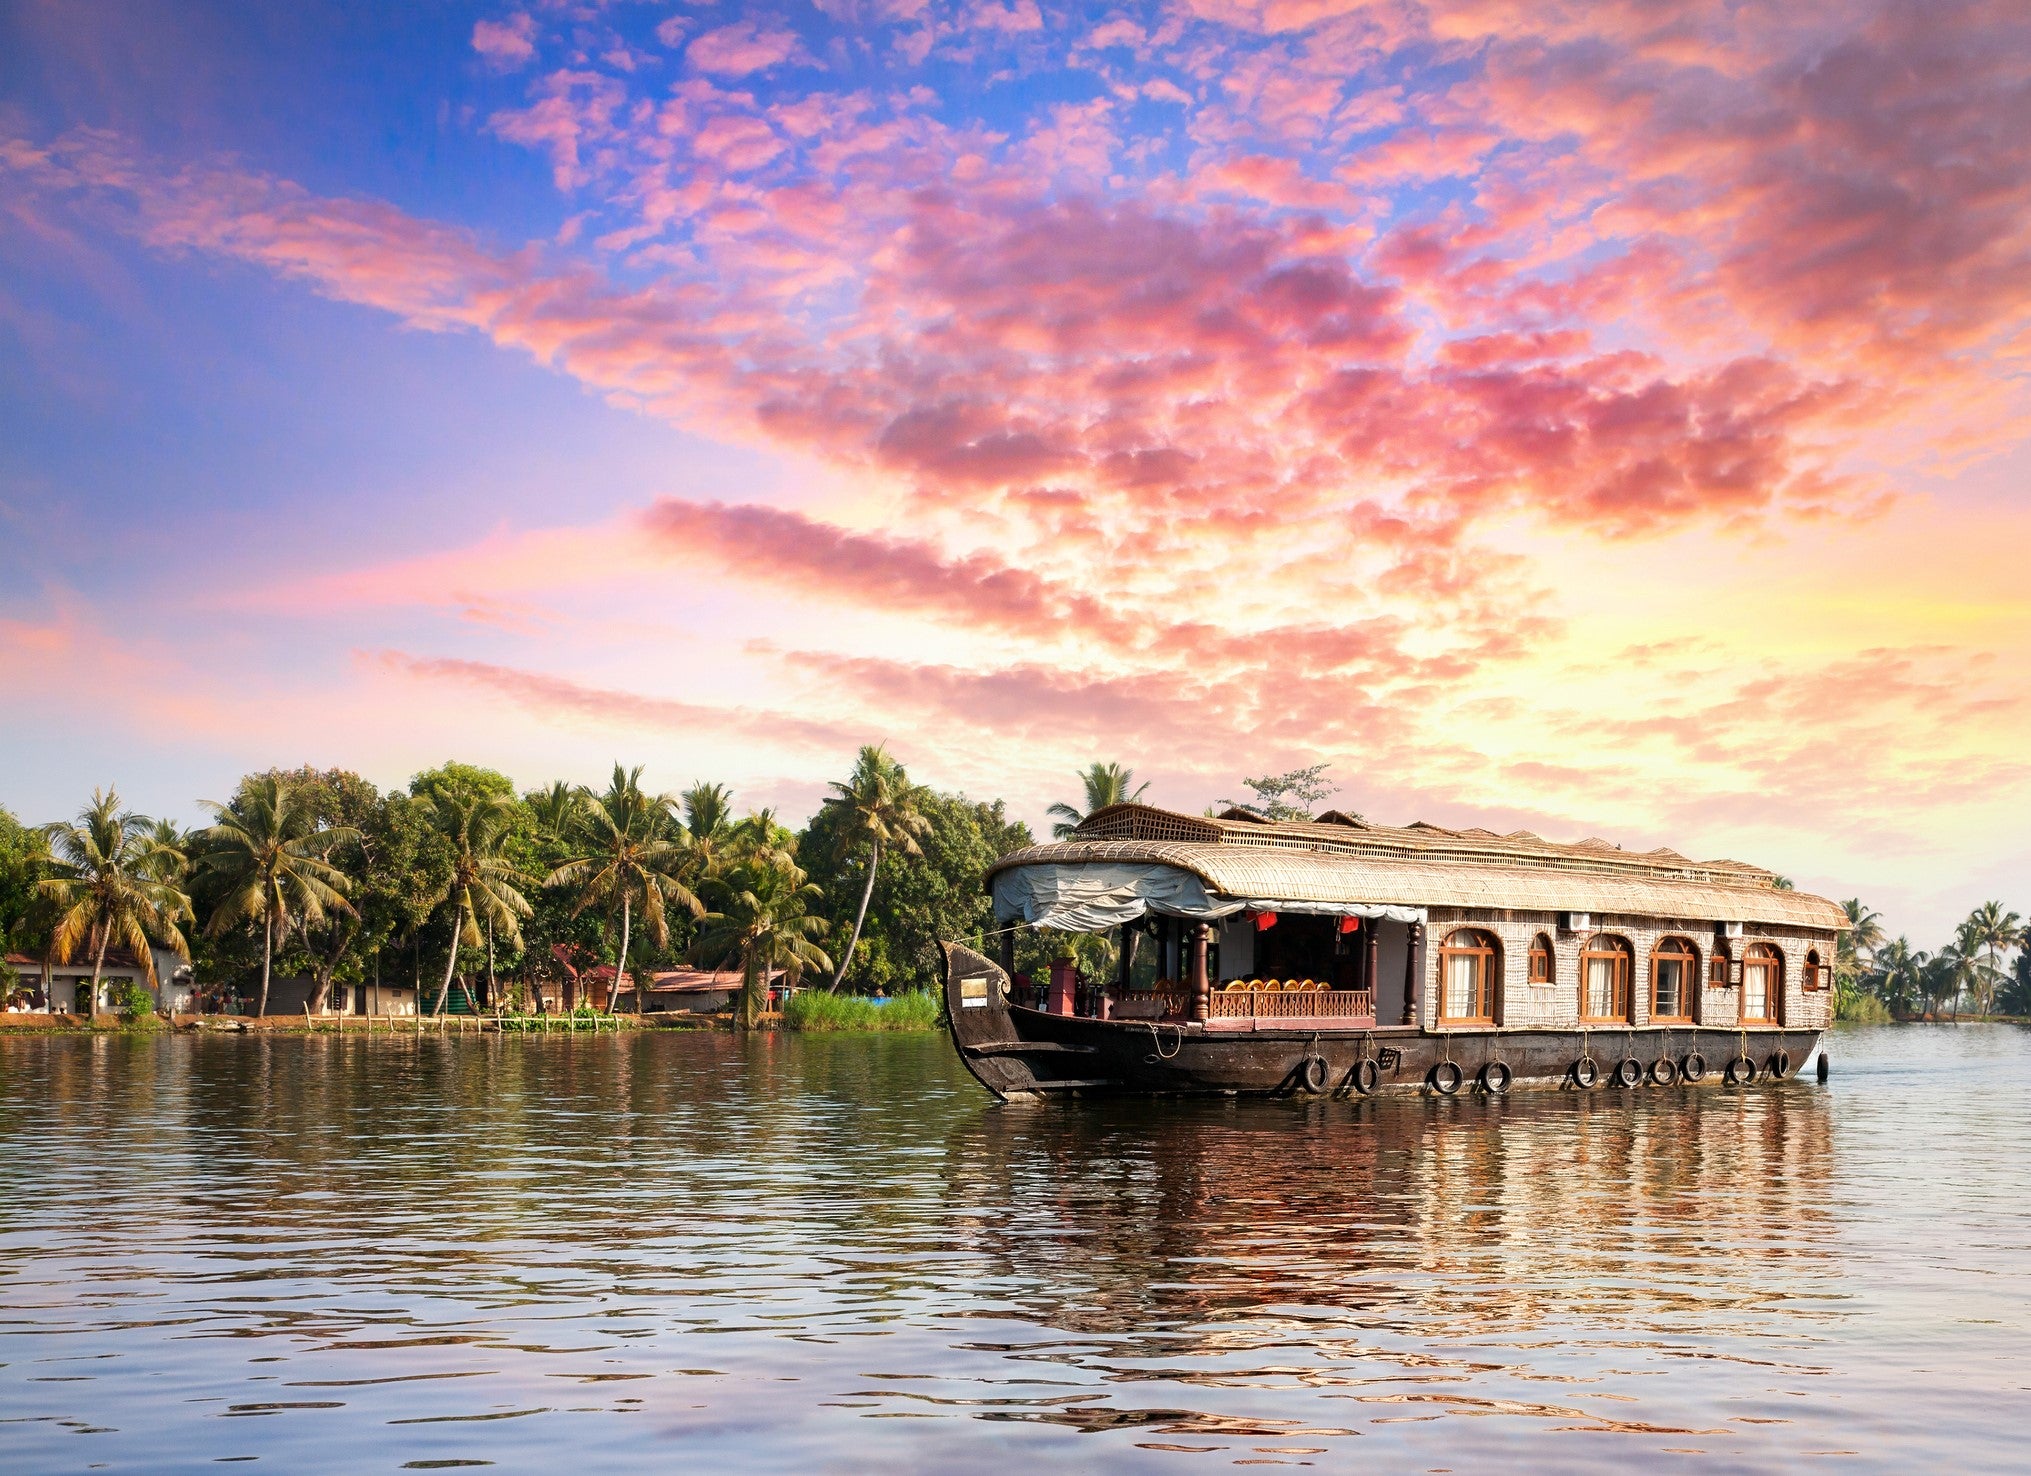 Indian summer: take in Kerala’s backwaters on a houseboat